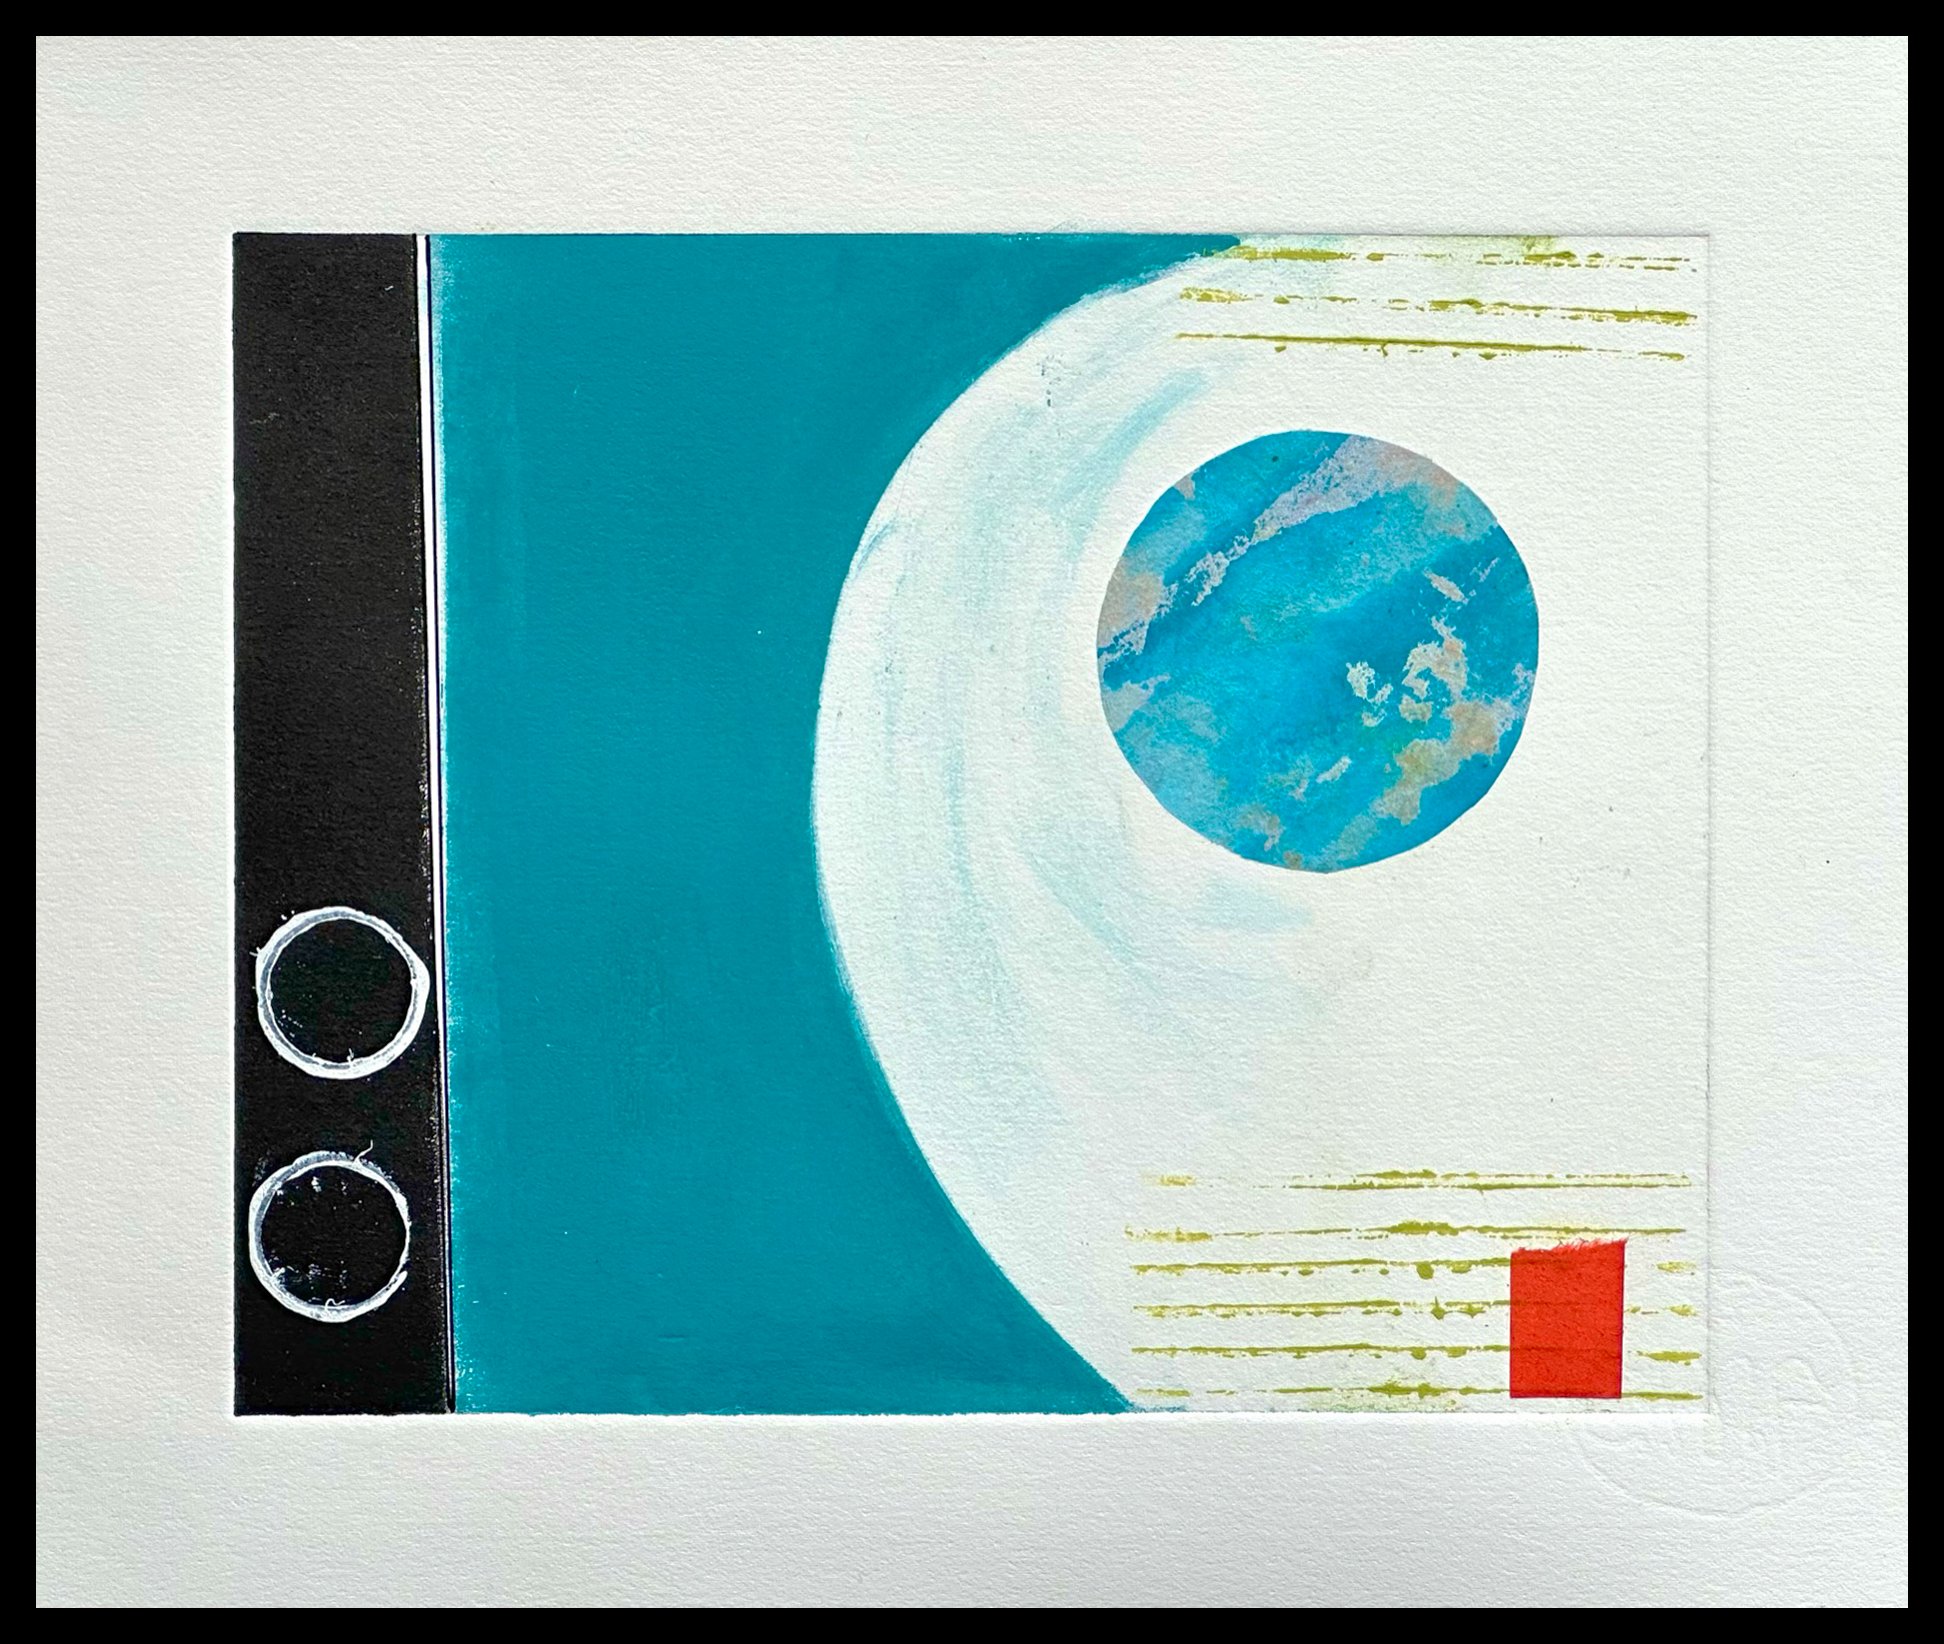    The Poetry of the Earth     14.5 x 16 “ Matted, Monotype /Collage, 1/1   $190 - SOLD  